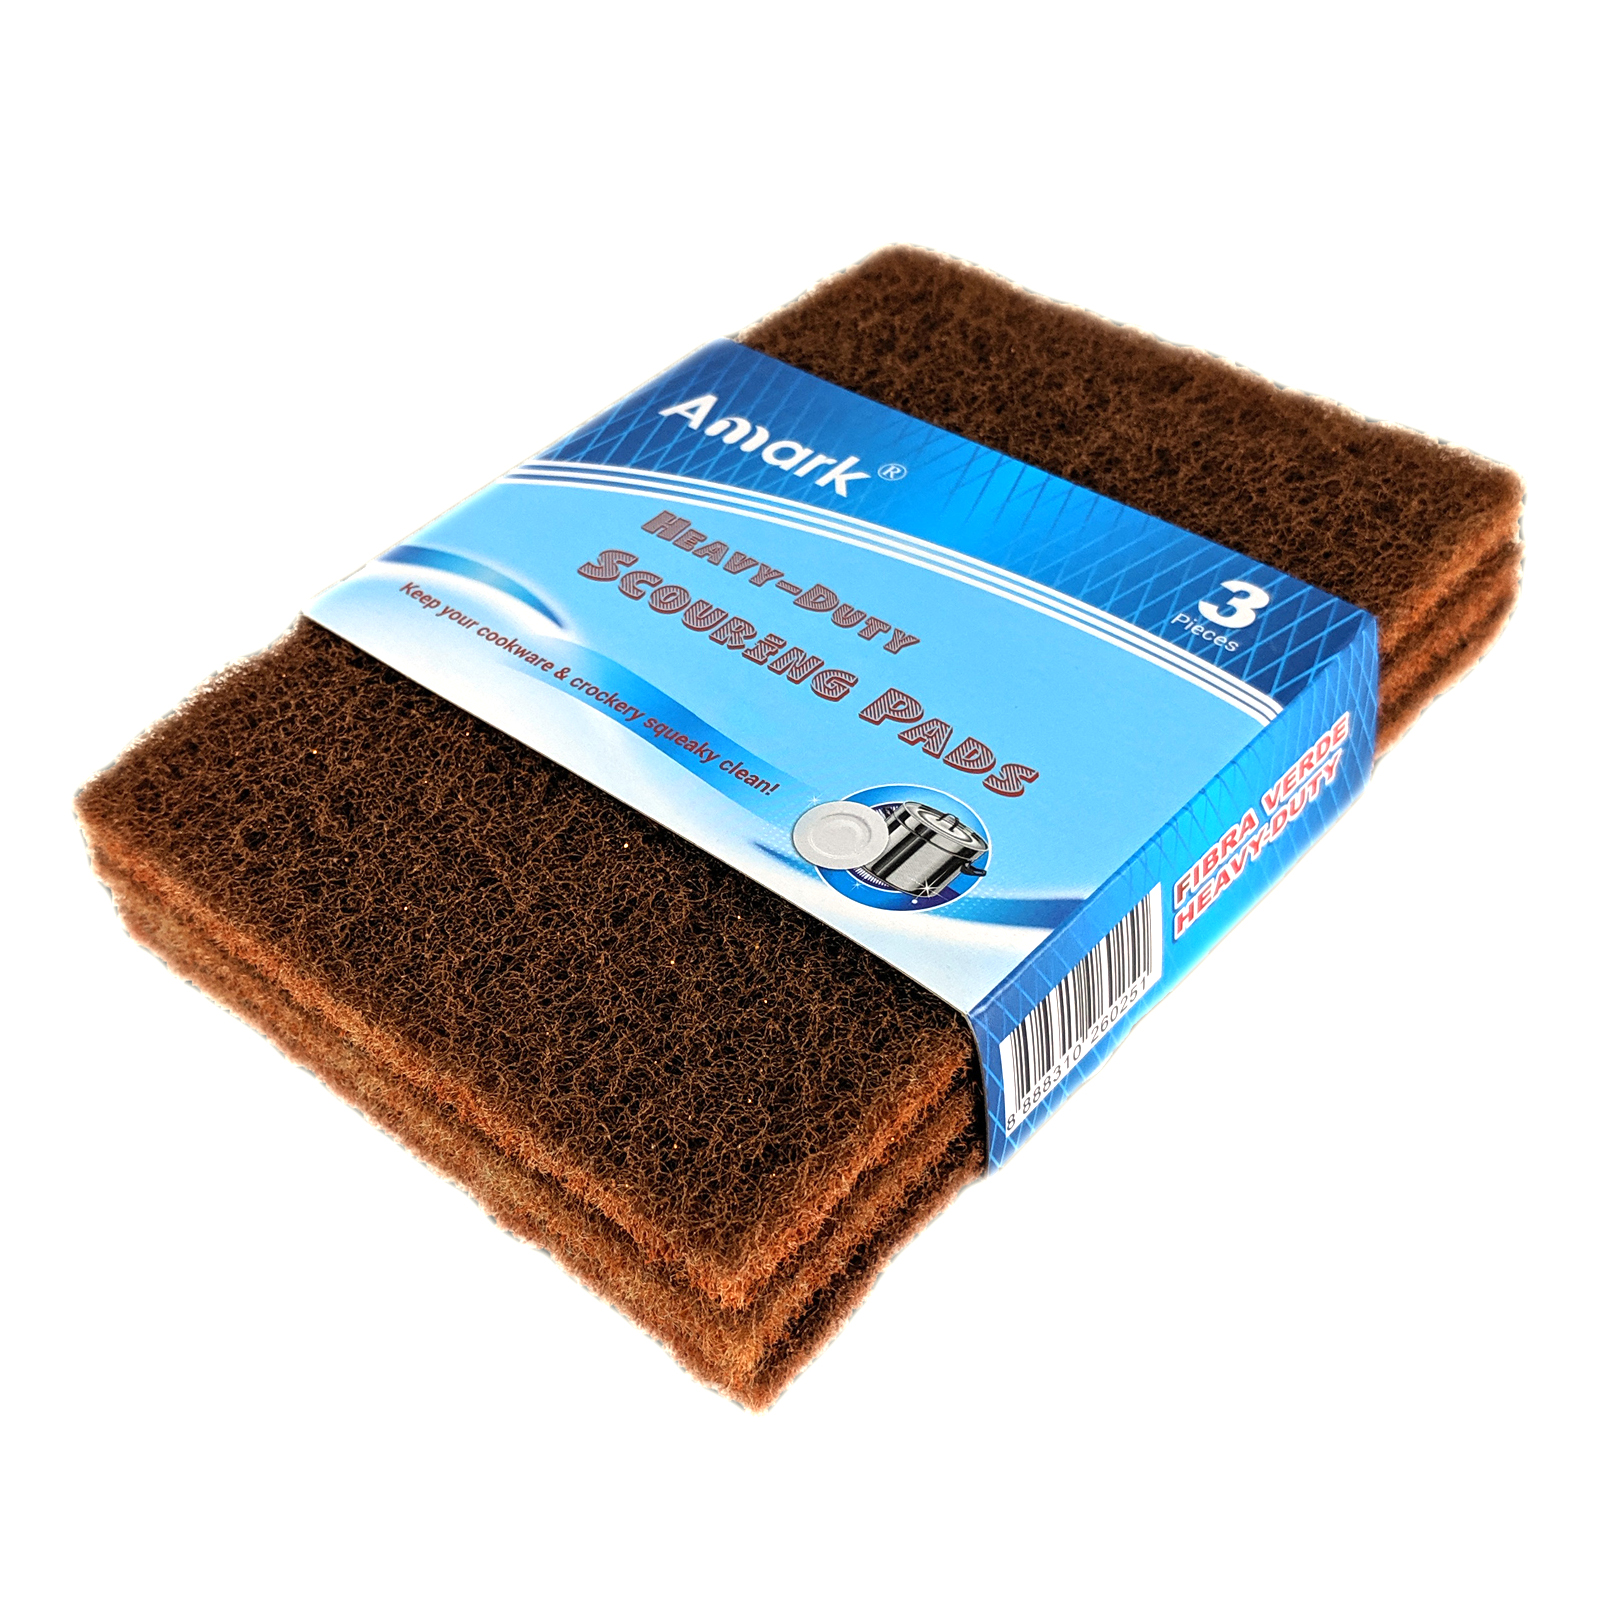 Amark Copper Bright Heavy-Duty Scouring Pad 6-pc Pack